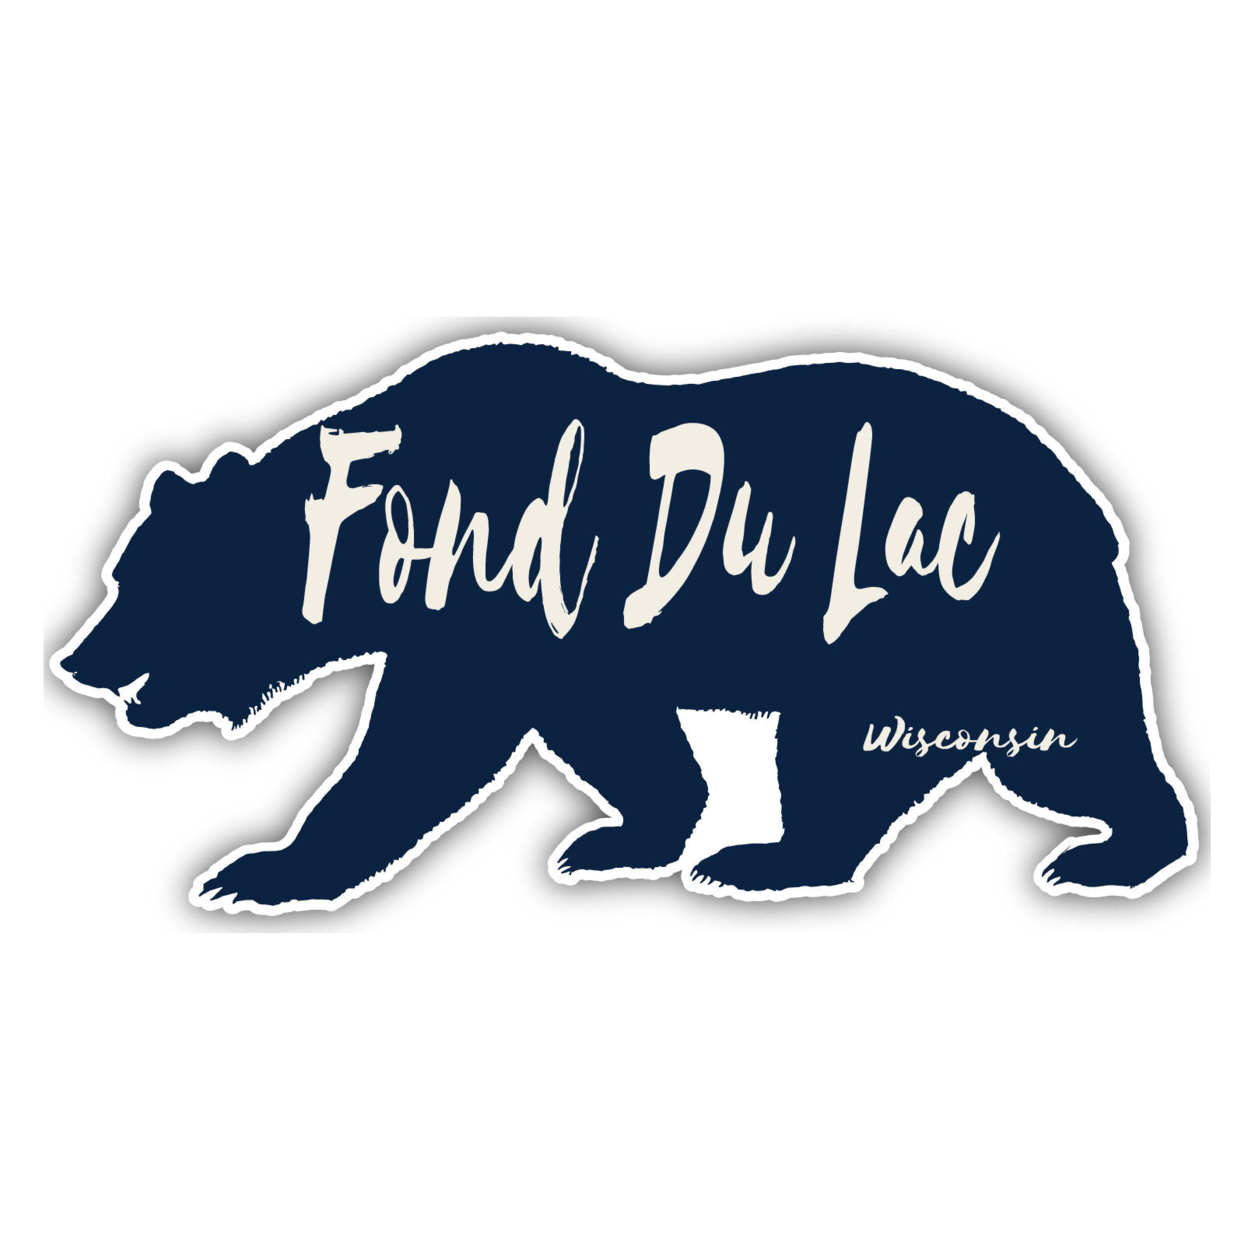 Fond Du Lac Wisconsin Souvenir Decorative Stickers (Choose Theme And Size) - Single Unit, 2-Inch, Great Outdoors